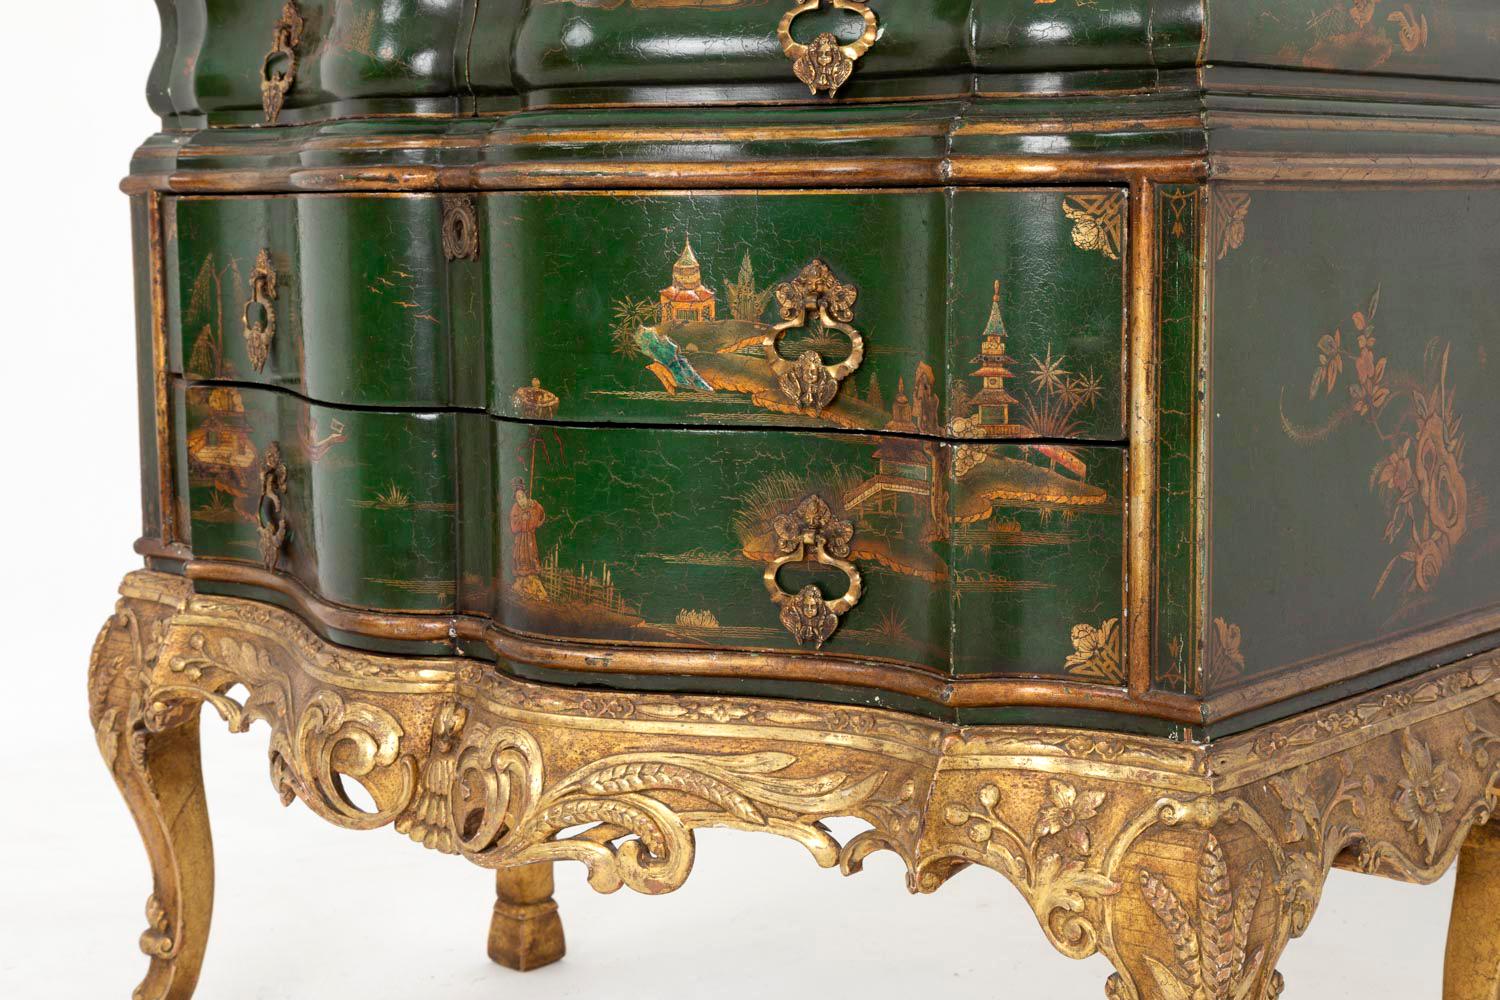 Gilt Serpentine Commode in Green Lacquered Wood, Chinese Decoration, 1950s